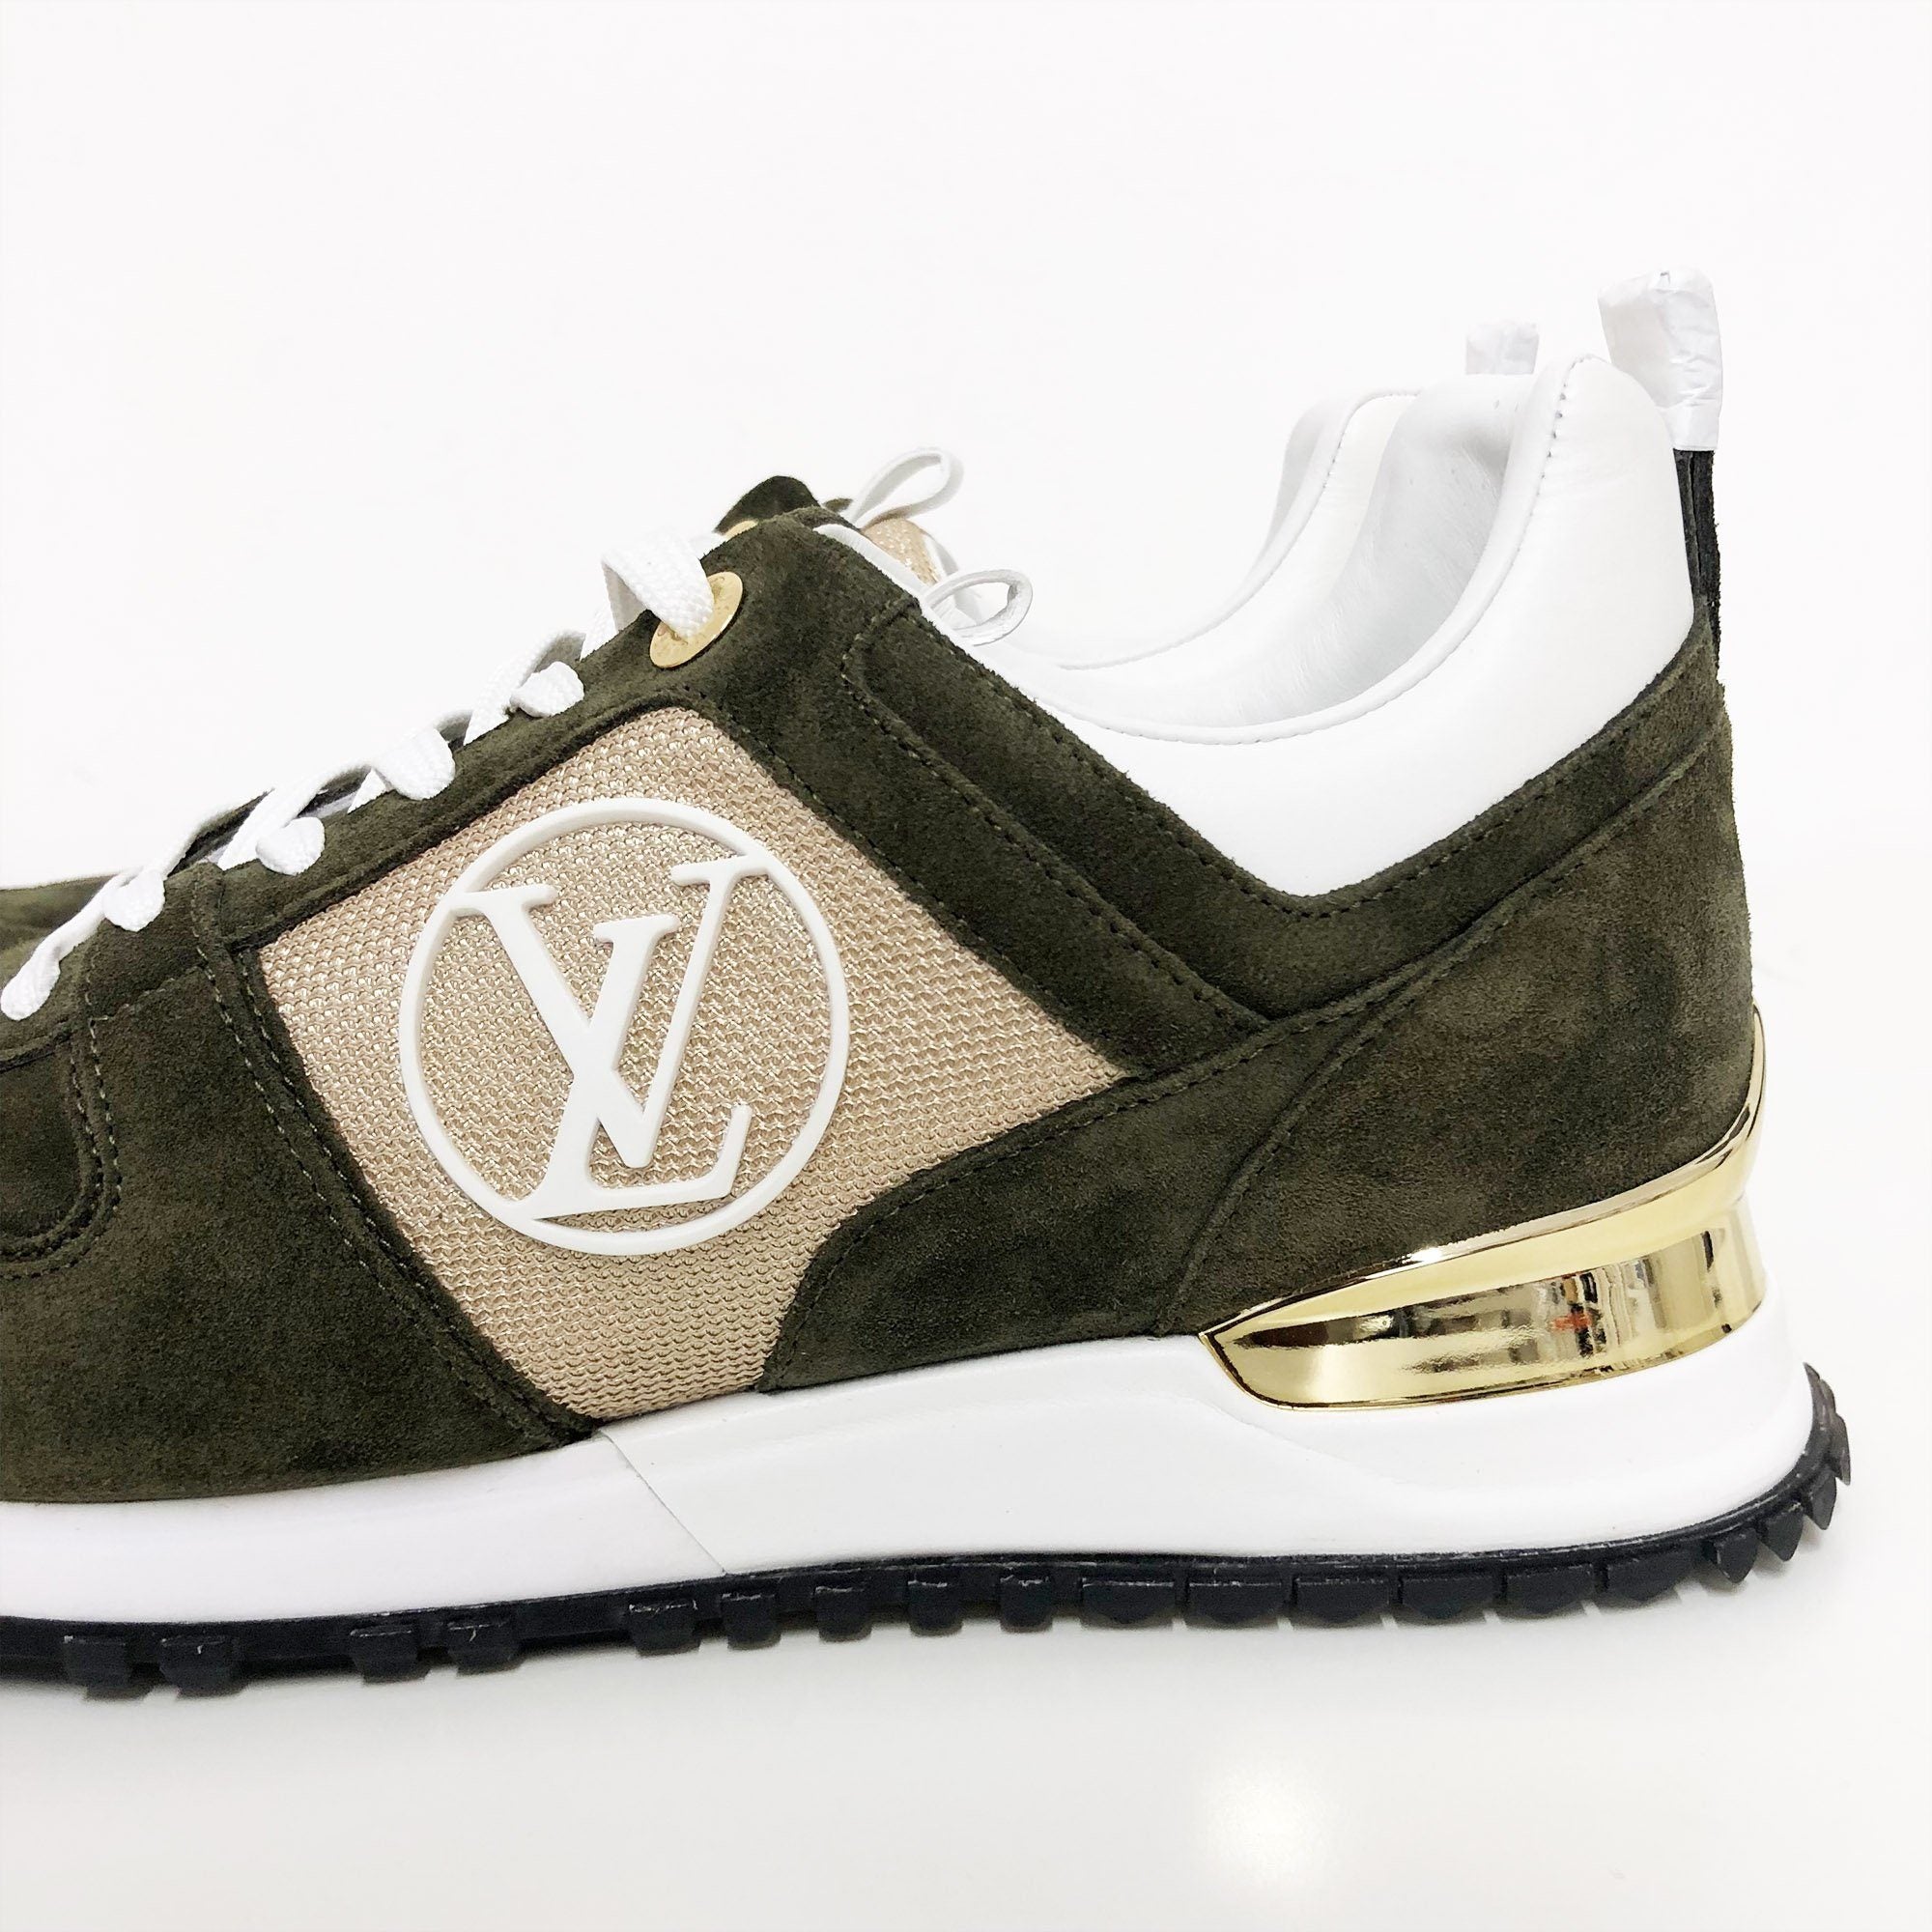 Most Expensive Louis Vuitton Sneakers For Men | Walden Wong